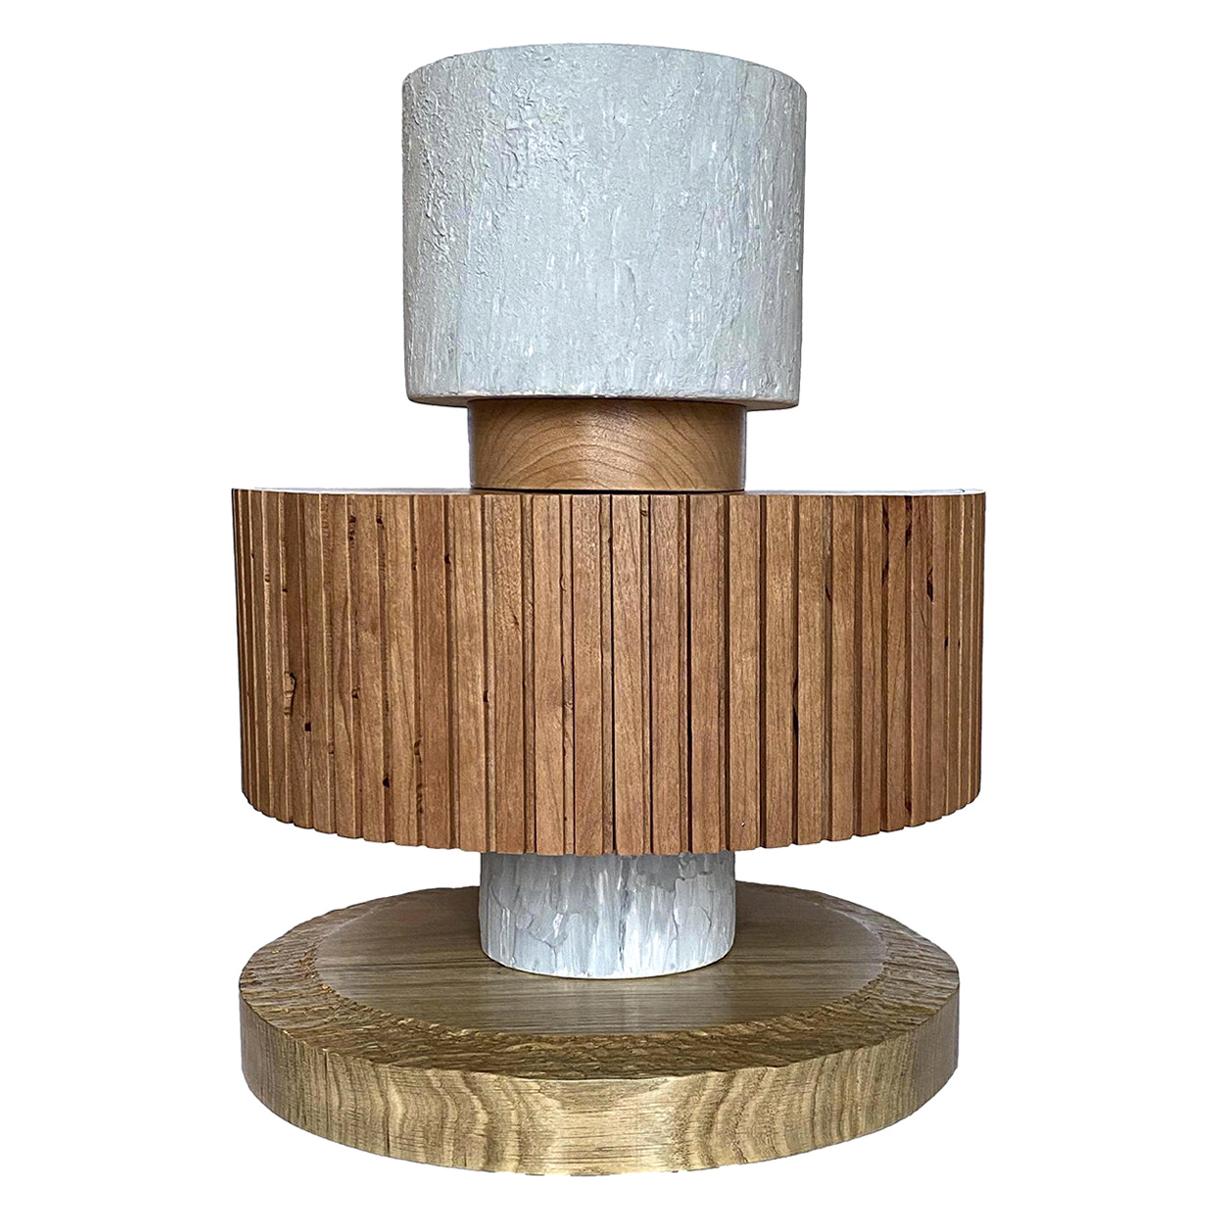 Totem Table Lamp by Mascia Meccani #3 For Sale